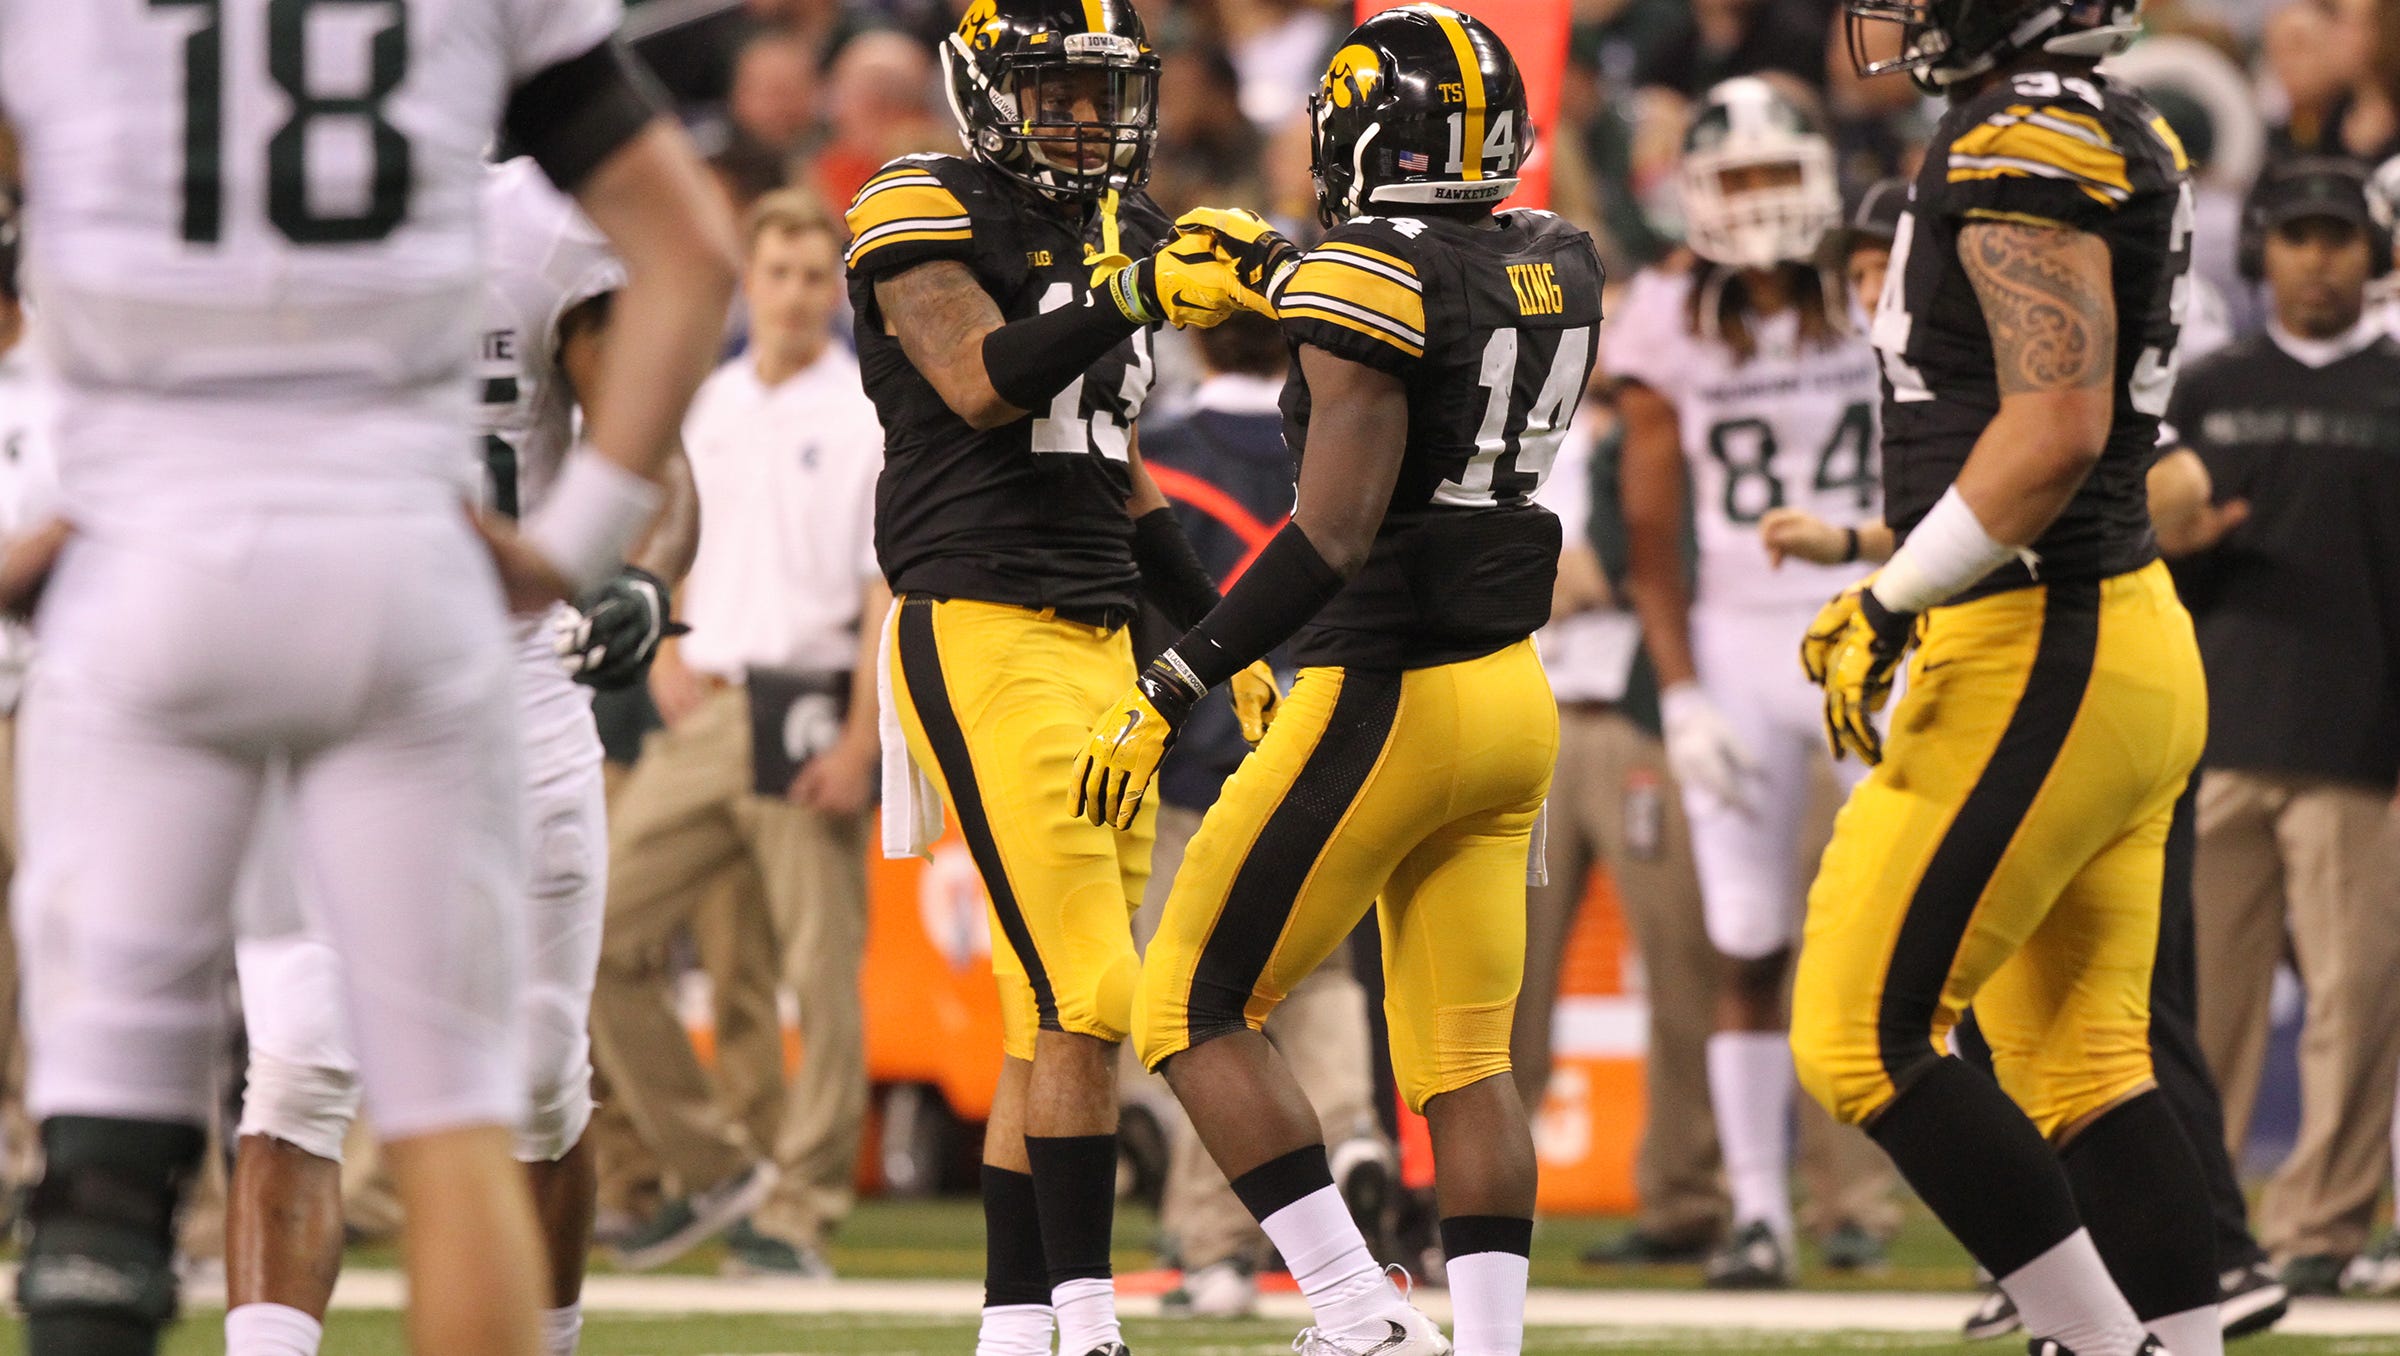 Iowa's Greg Mabin, left, and Desmond King celebrate a stop during the Hawkeyes' Big Ten Championship game against Michigan State at Lucas Oil Stadium in Indianapolis, Ind. on Saturday, Dec. 5, 2015.